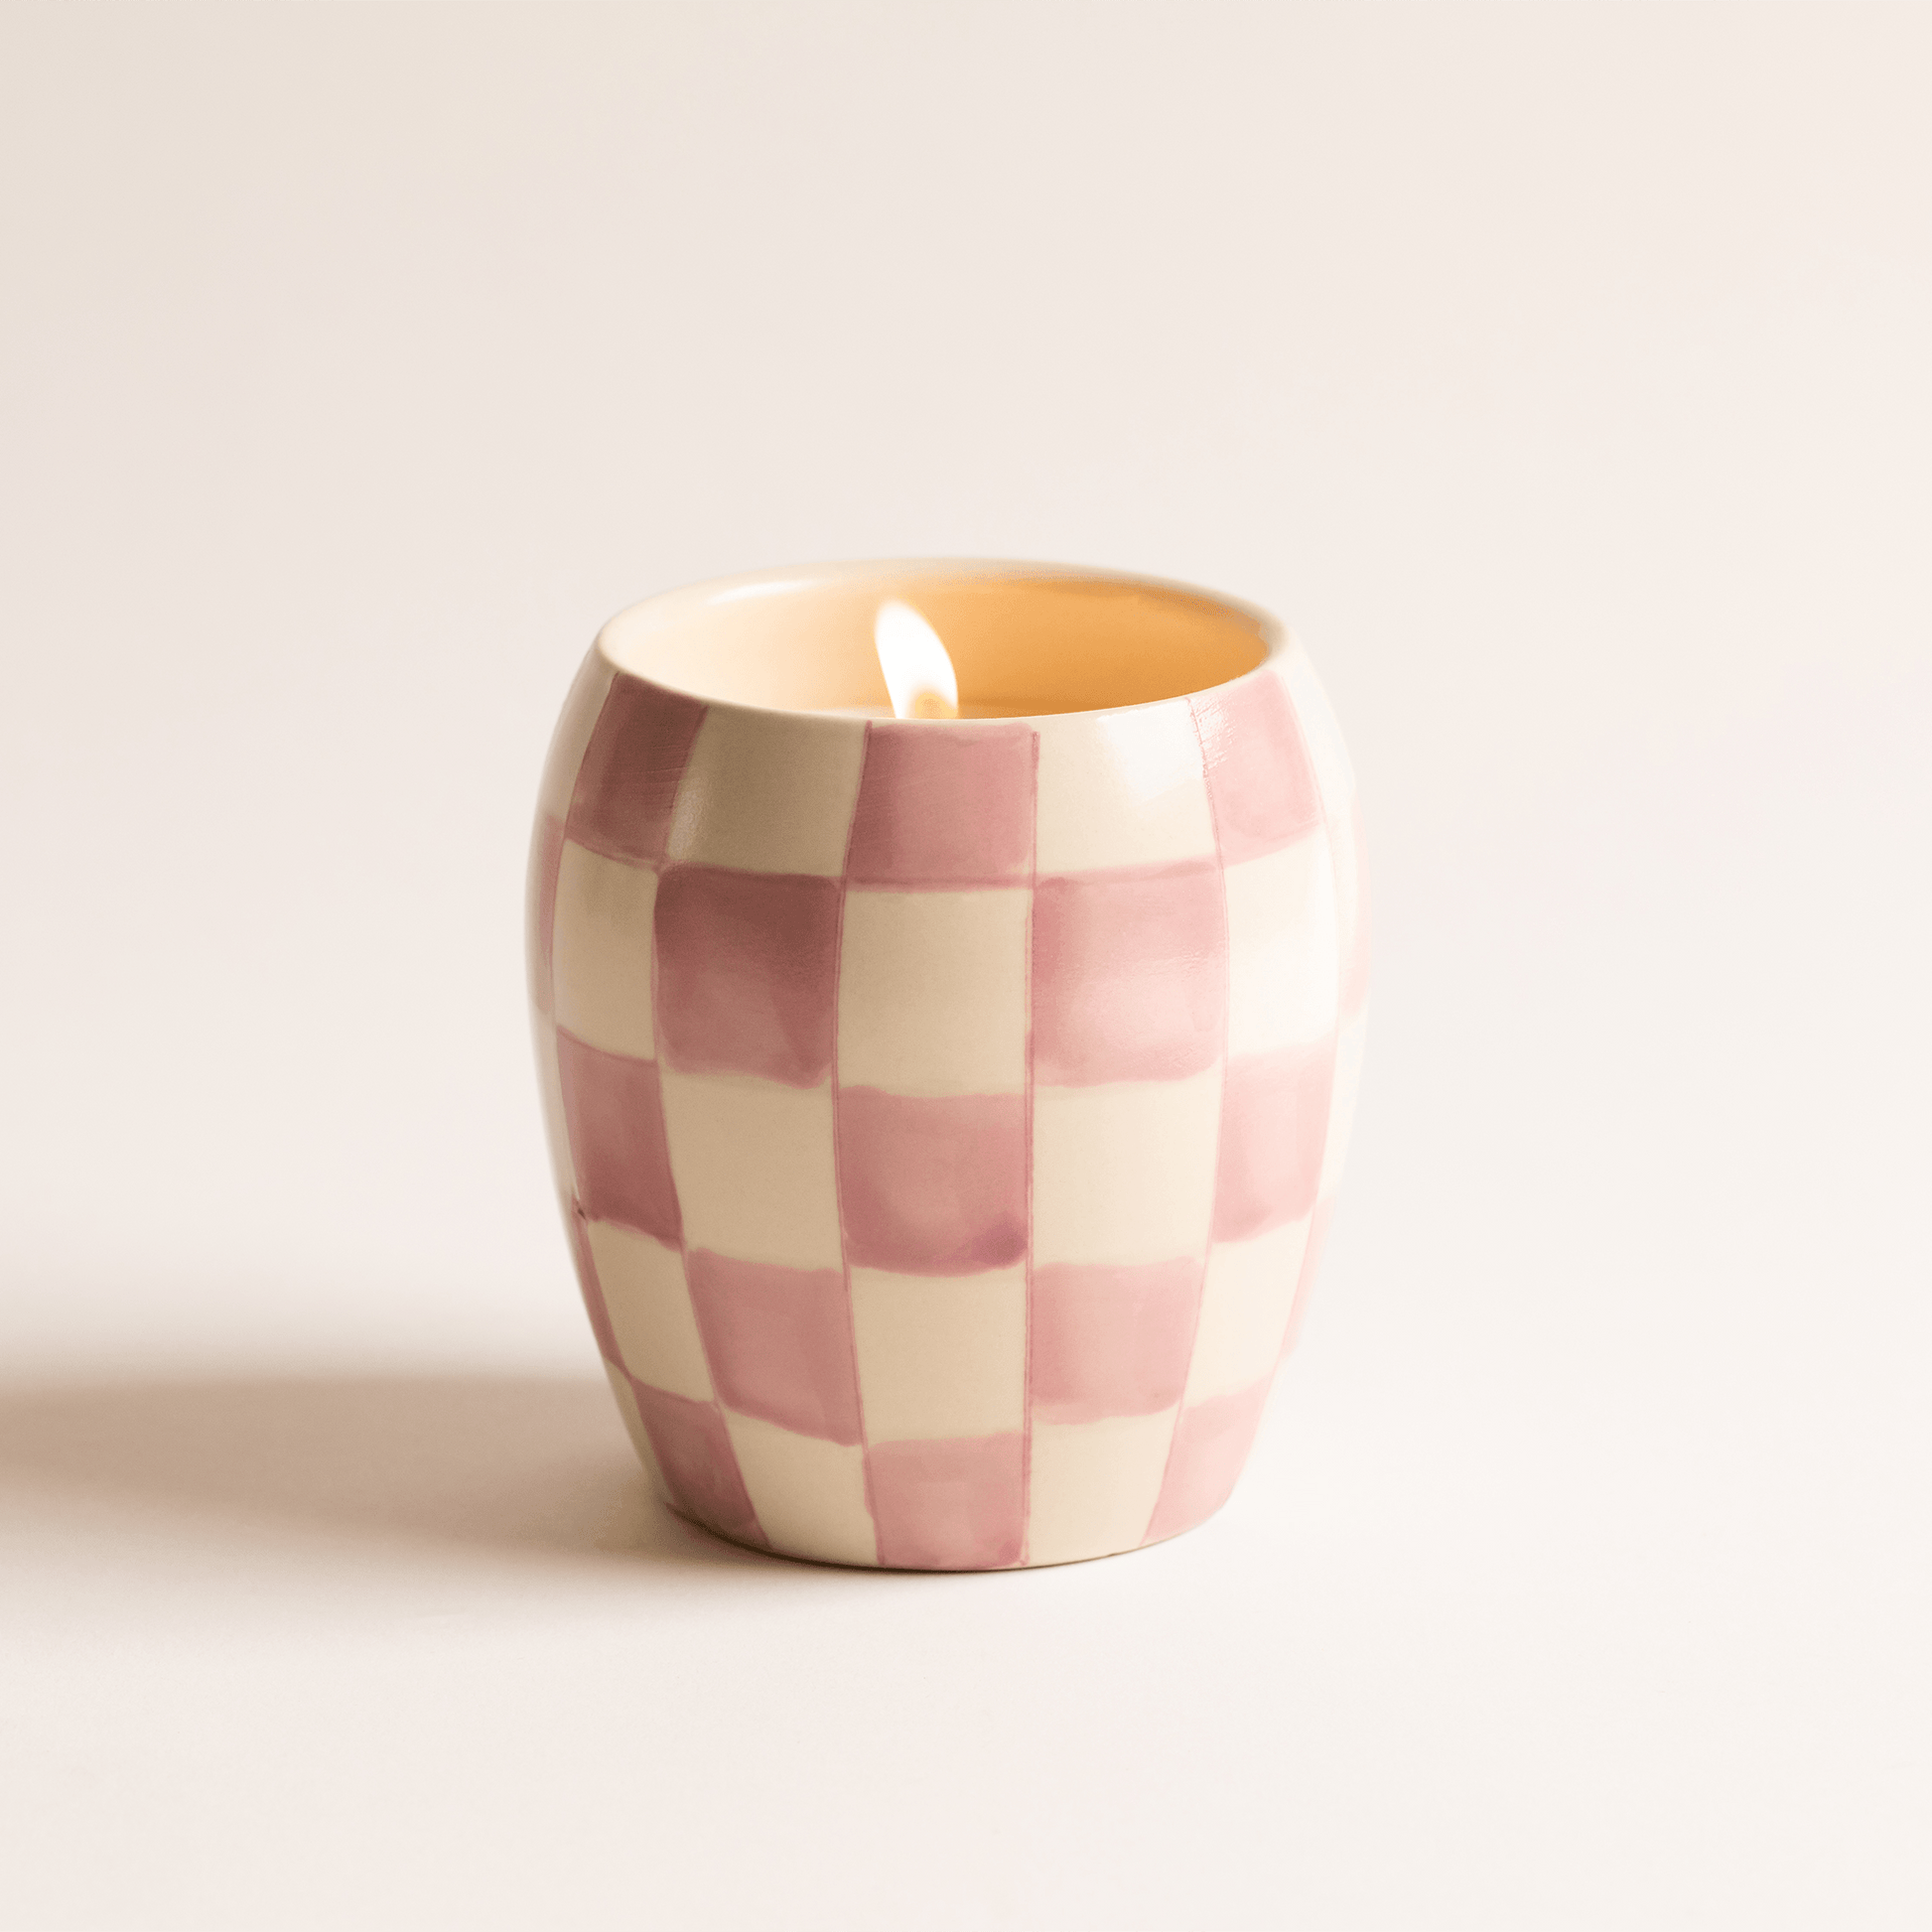 11 oz ceramic vessel with rounded cylindrical shape and a light purple and white checker design; one cotton wick